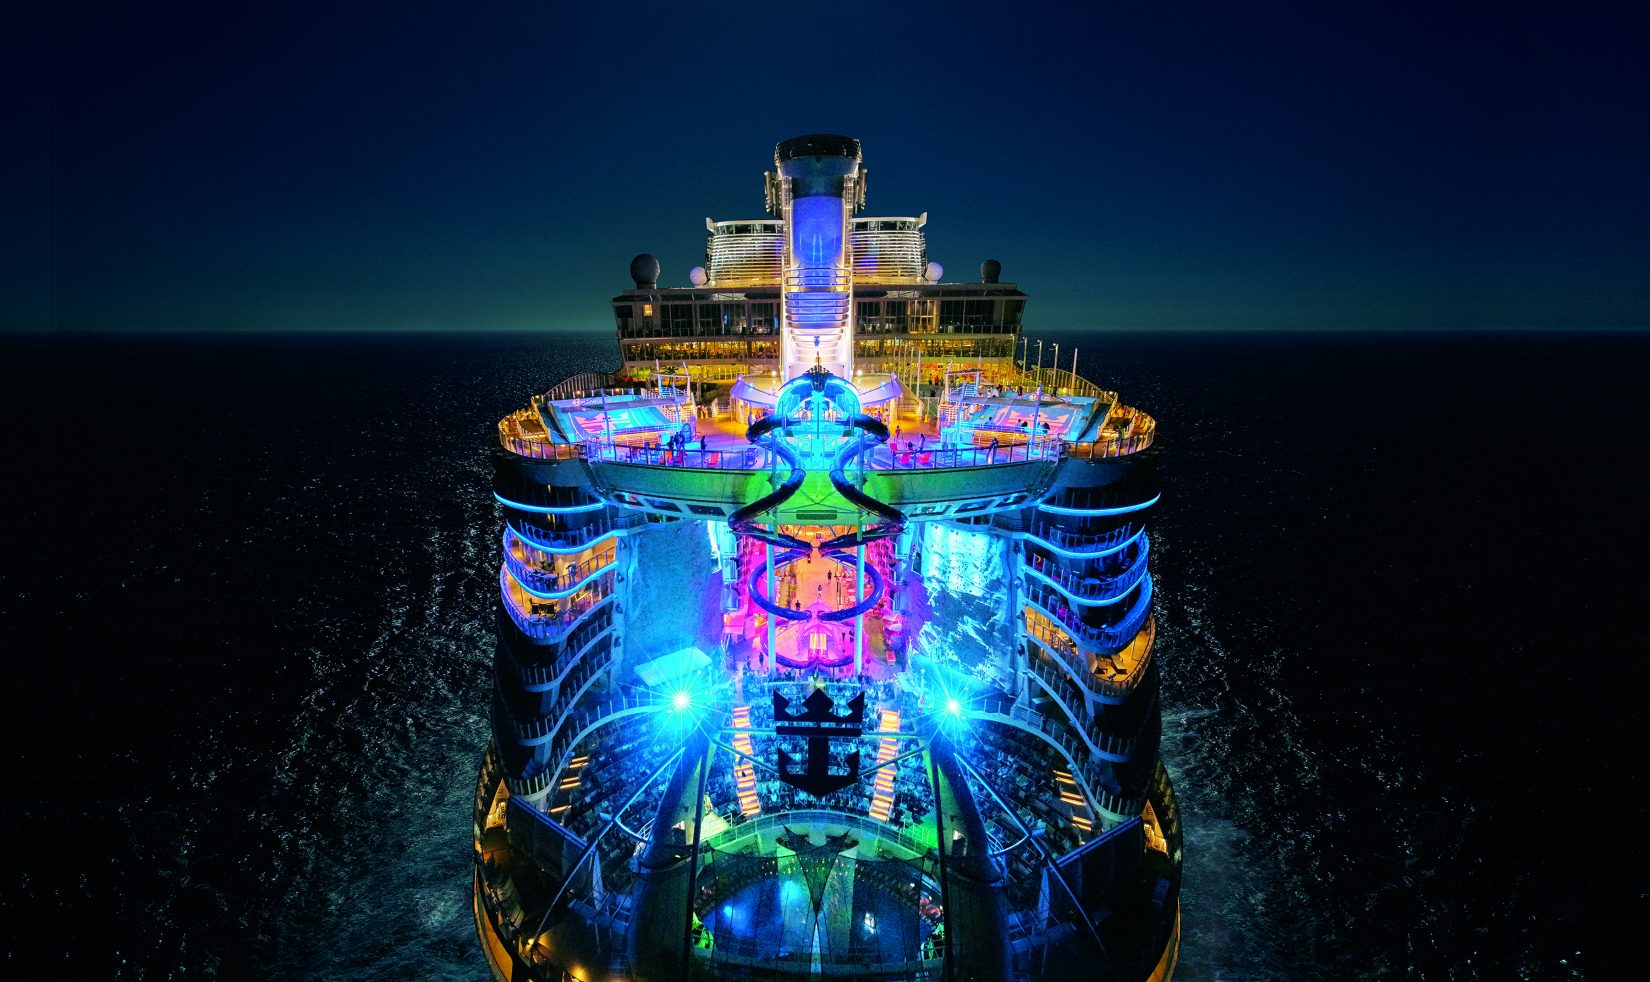 Announcing Our Newest Ship: Symphony of the Seas | Royal Caribbean Blog